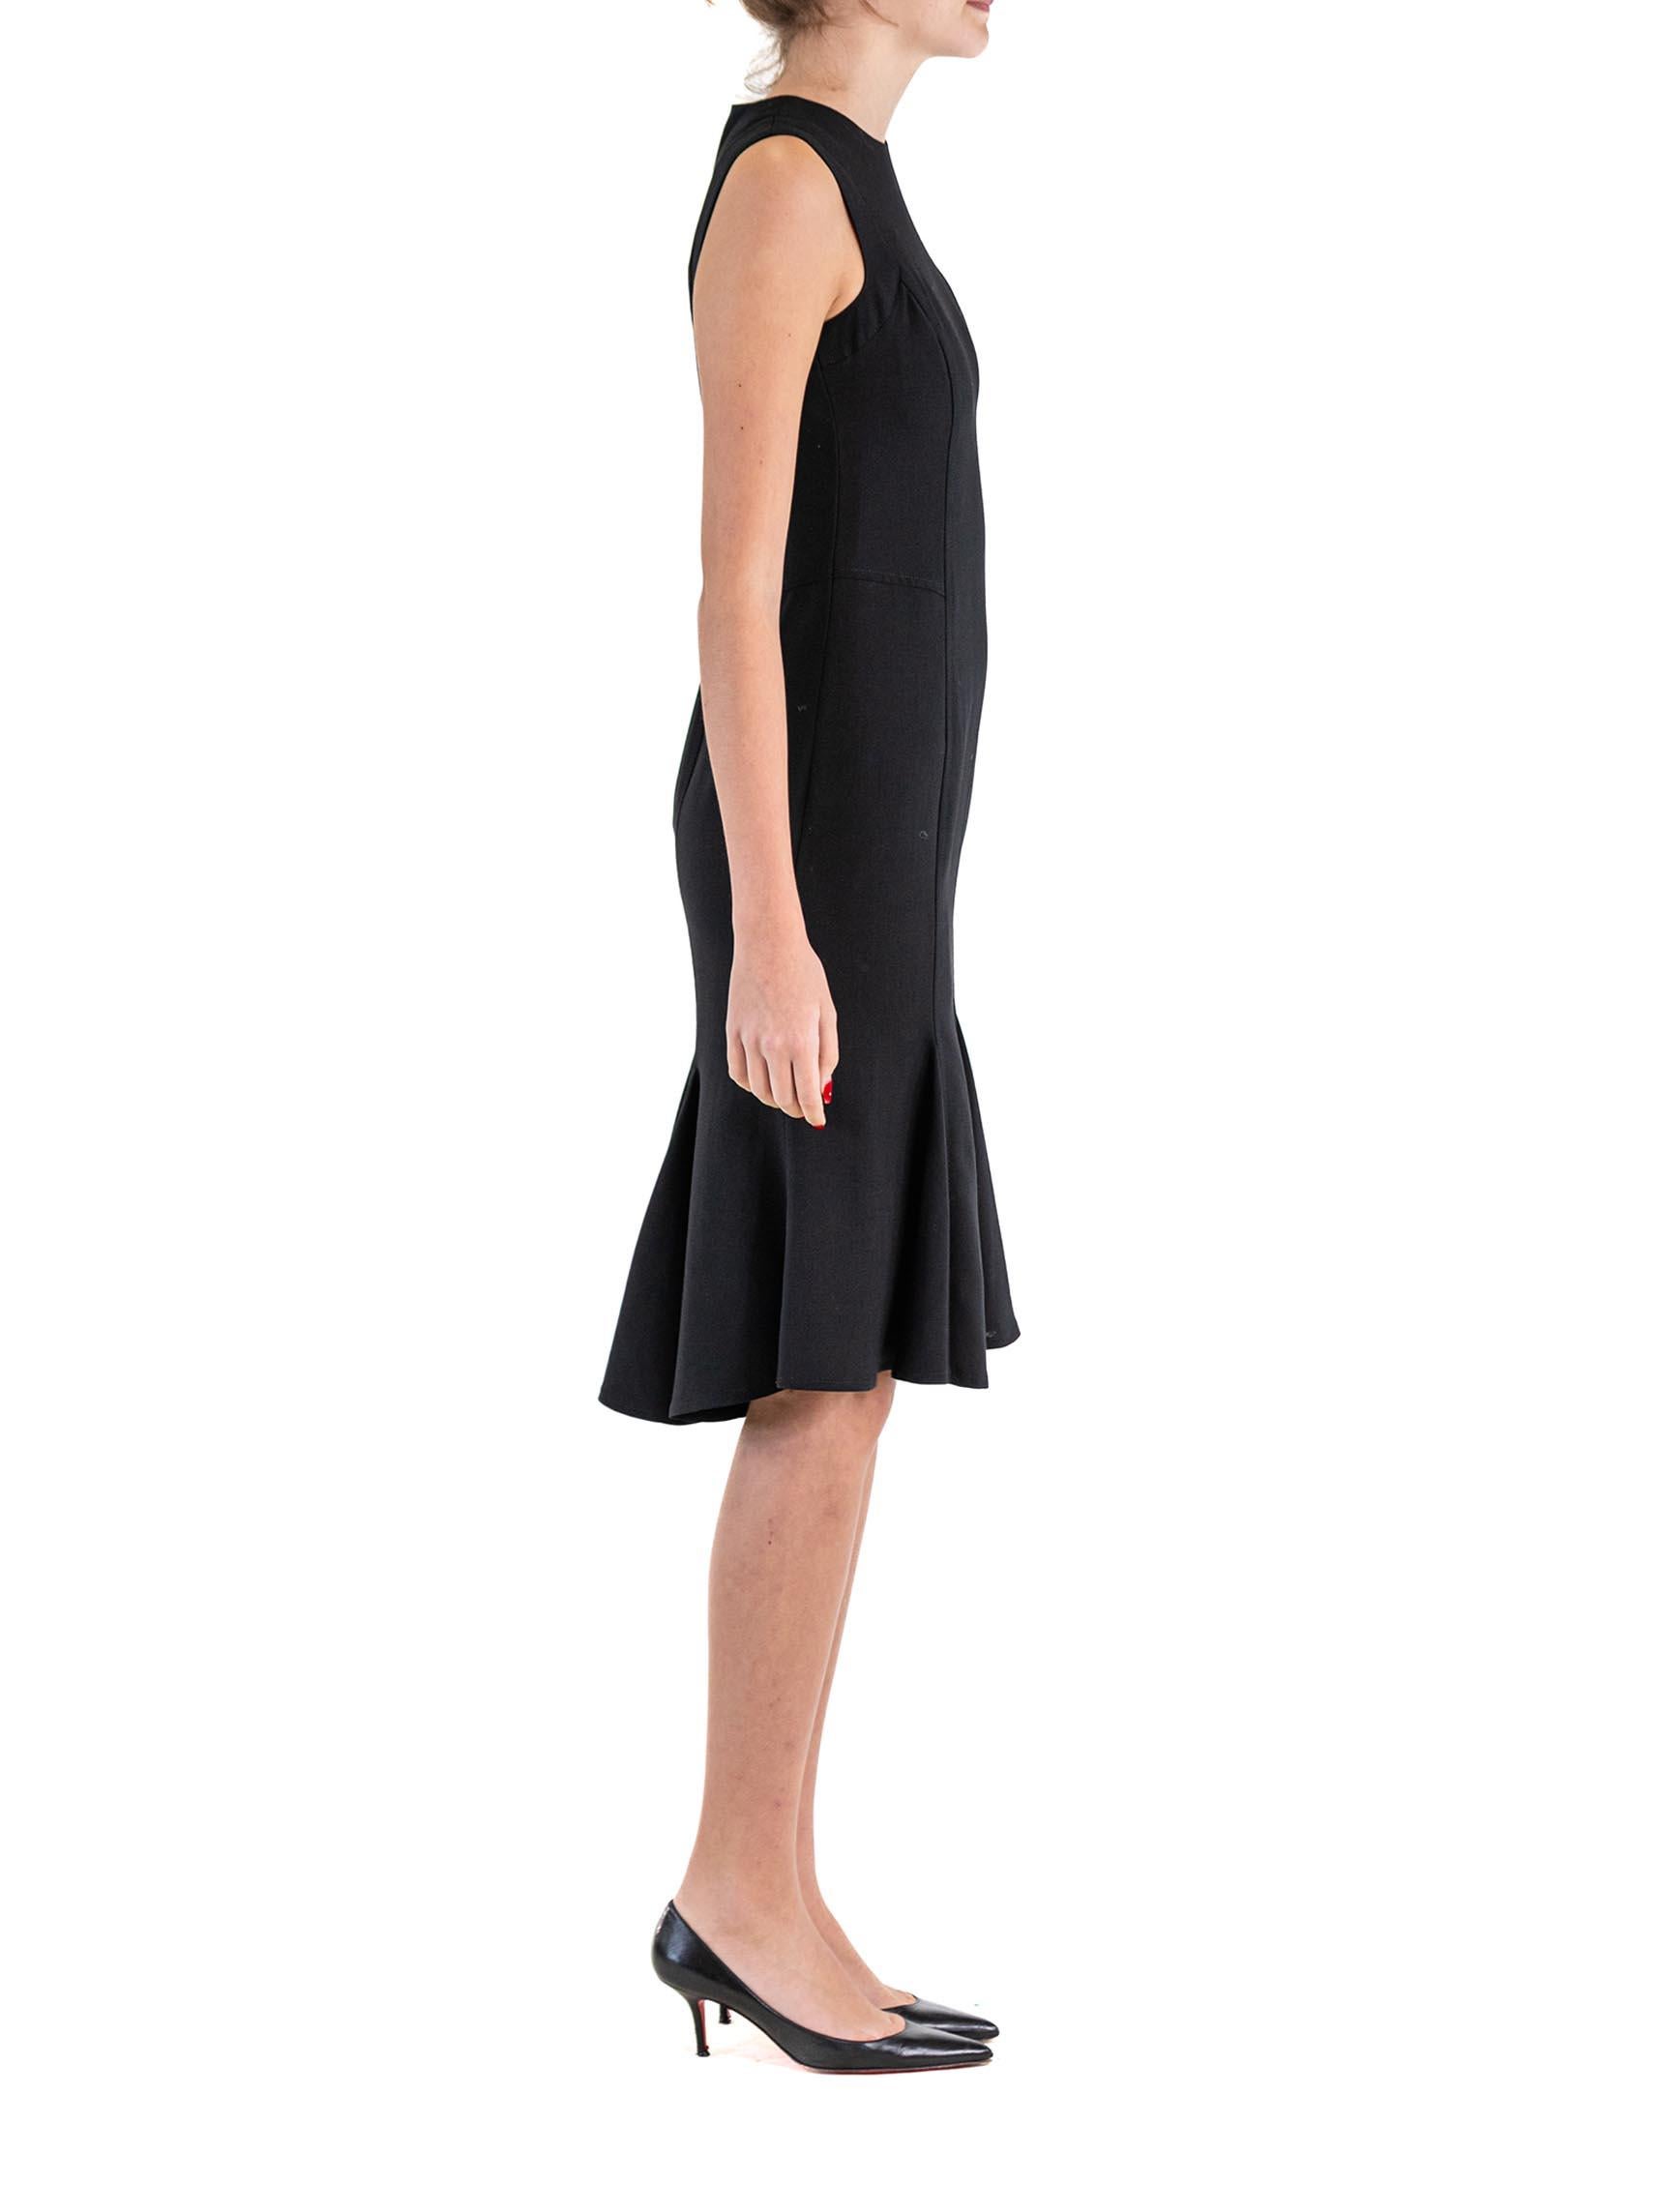 1990S GIANNI VERSACE Black Wool Crepe Dress With Fluted Hem In Excellent Condition For Sale In New York, NY